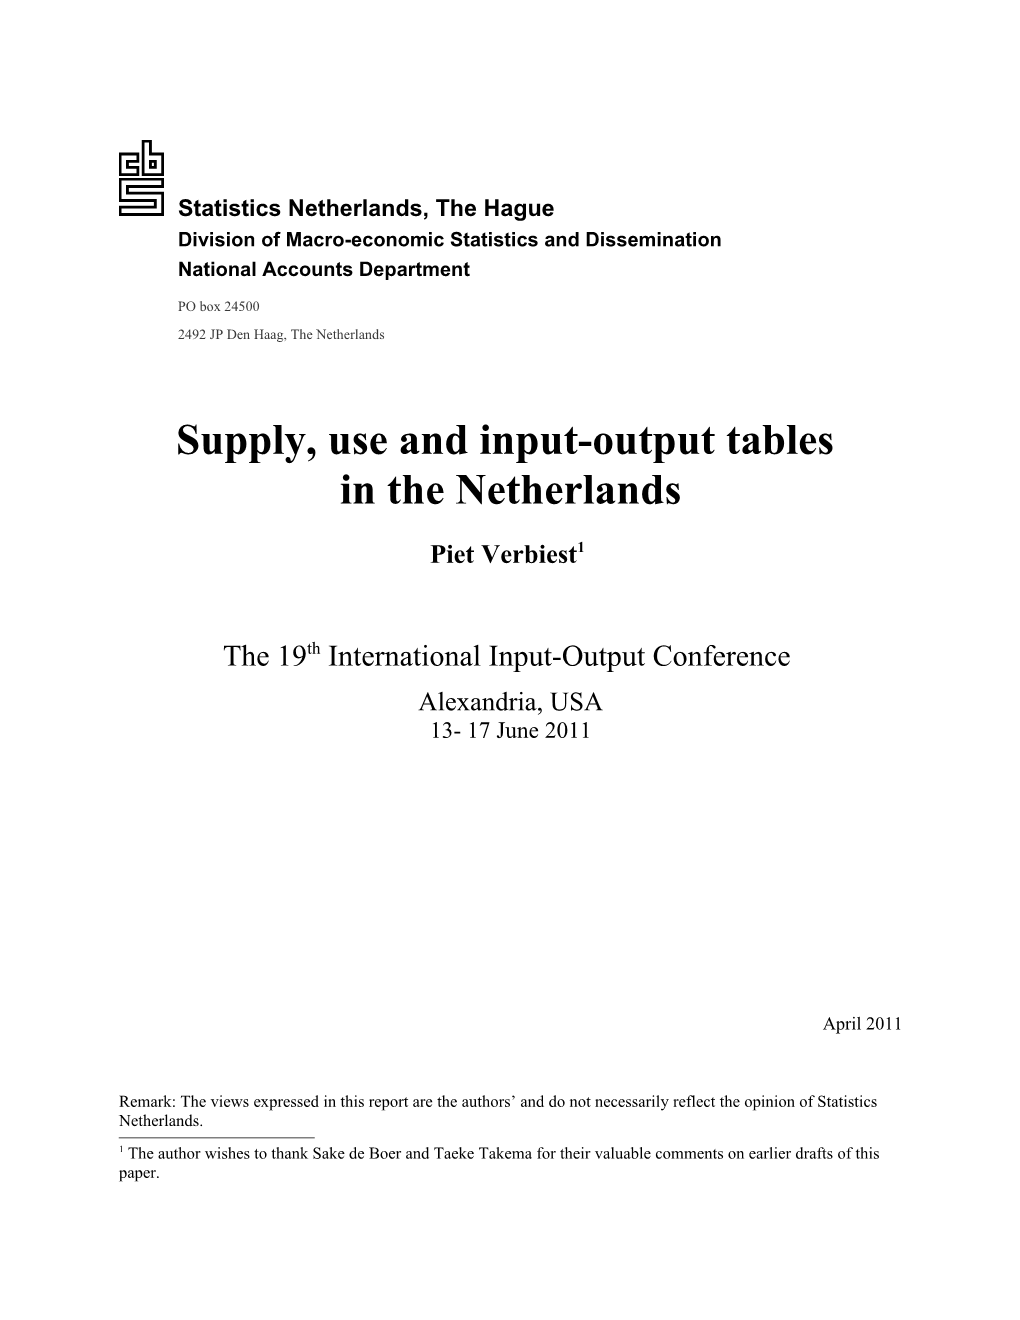 Supply, Use and Input Output Tables in the Netherlands